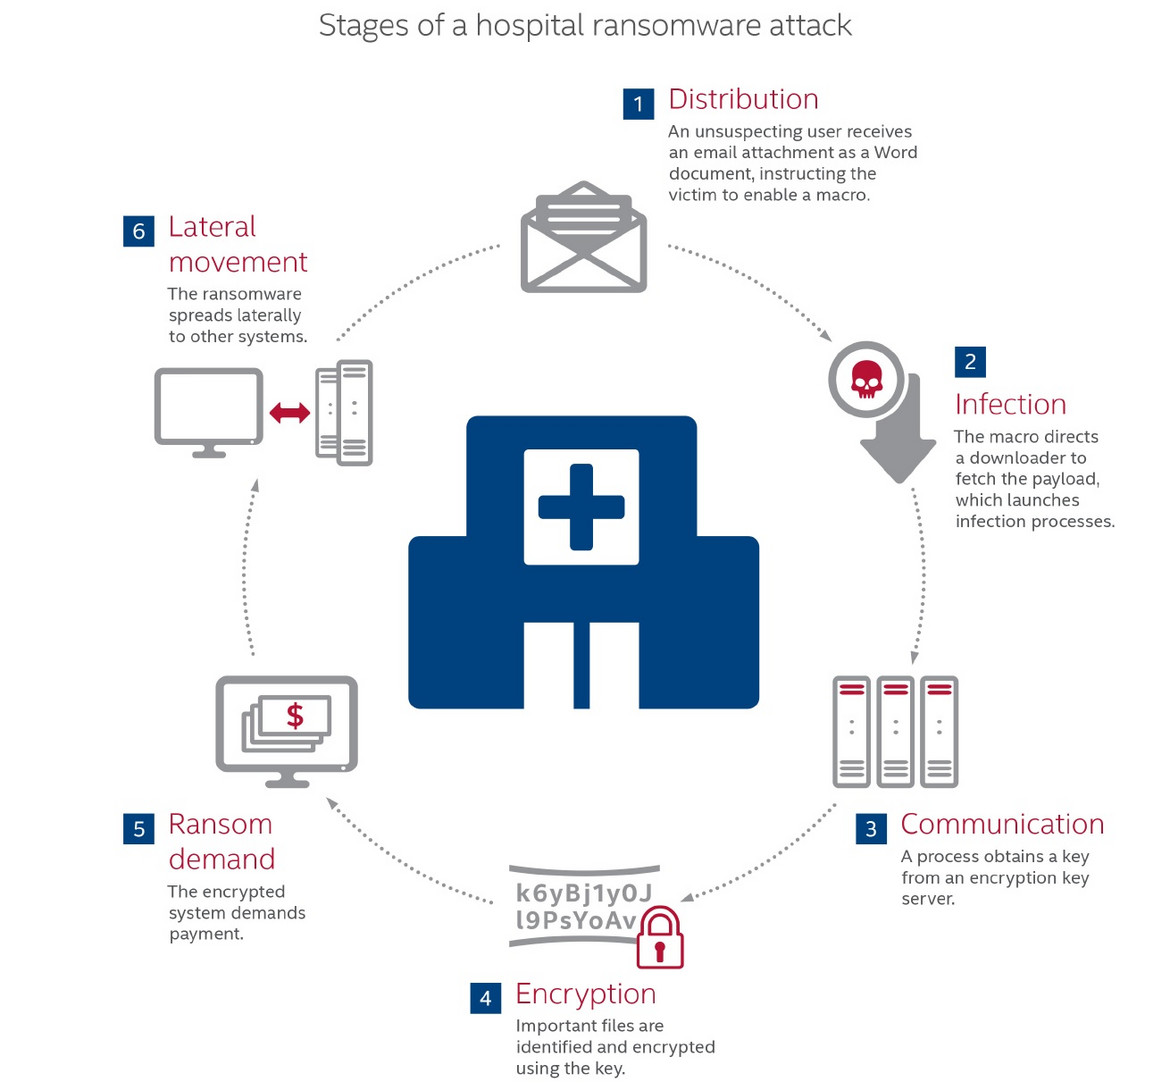 Stages of a hospital ransomware attack